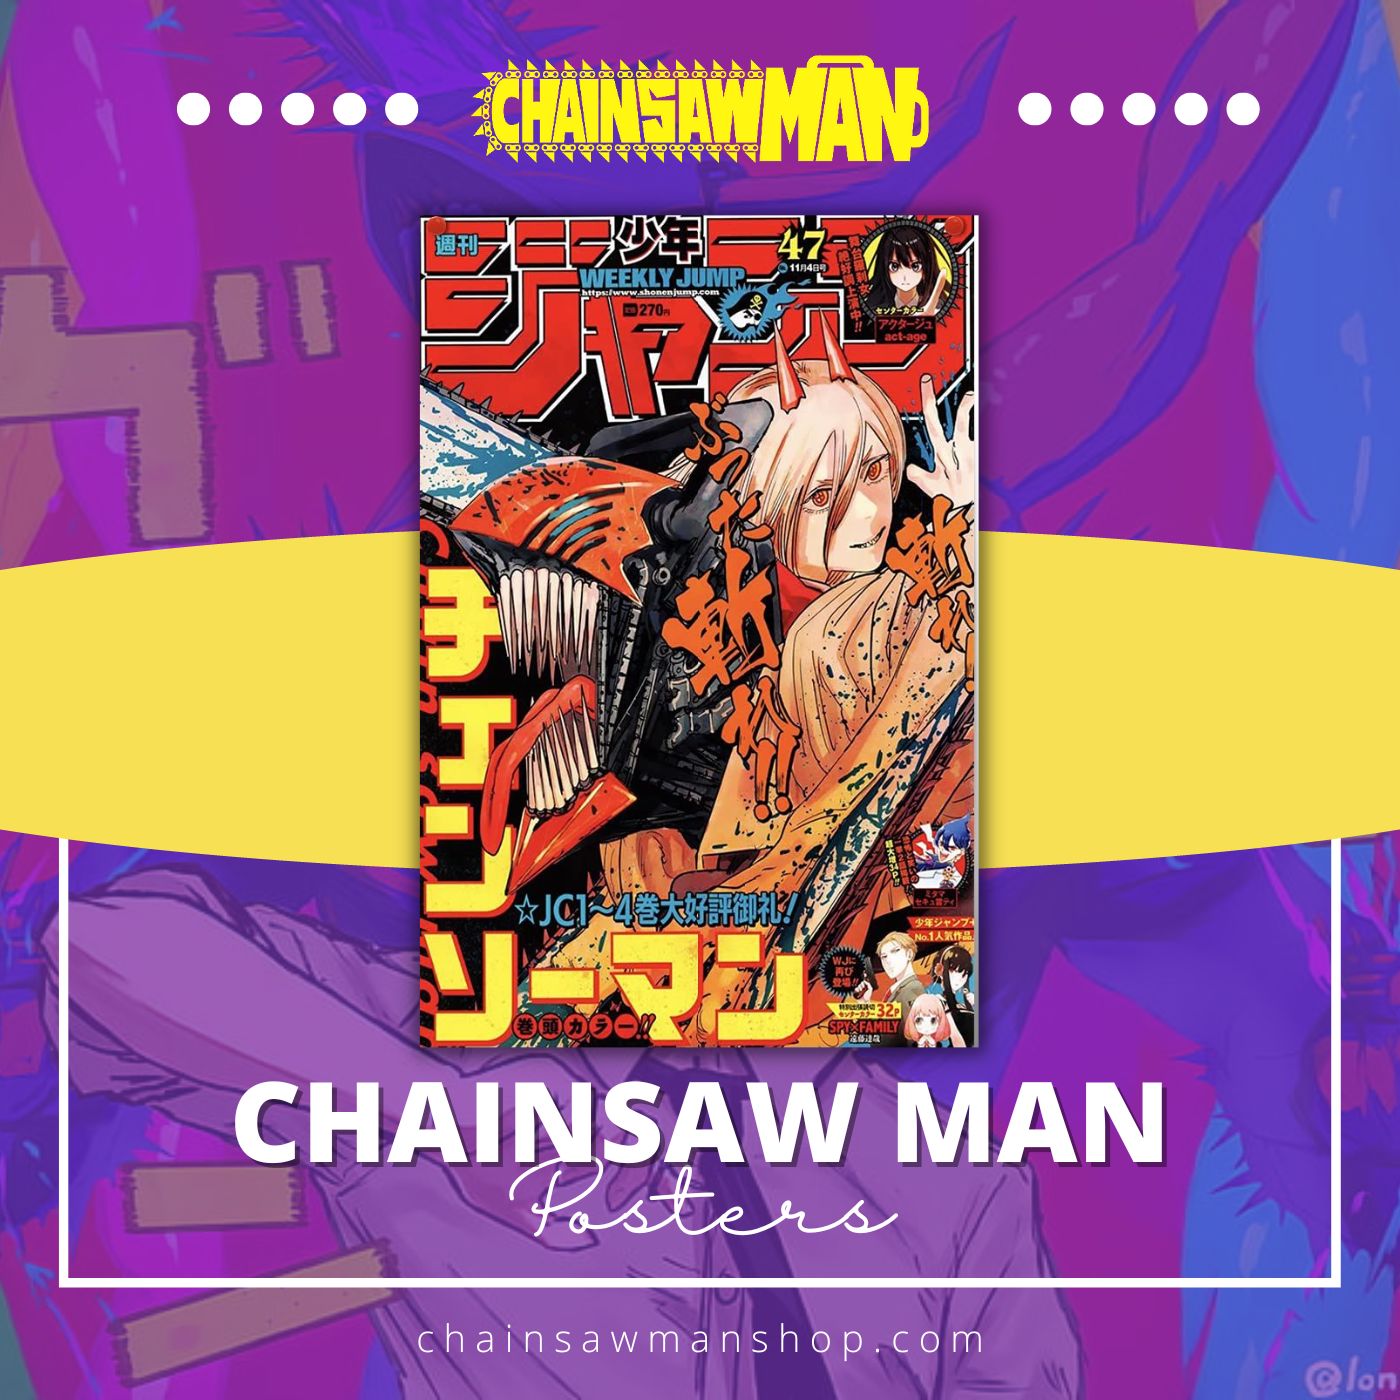 Buy Chainsaw Man Goods from Japan